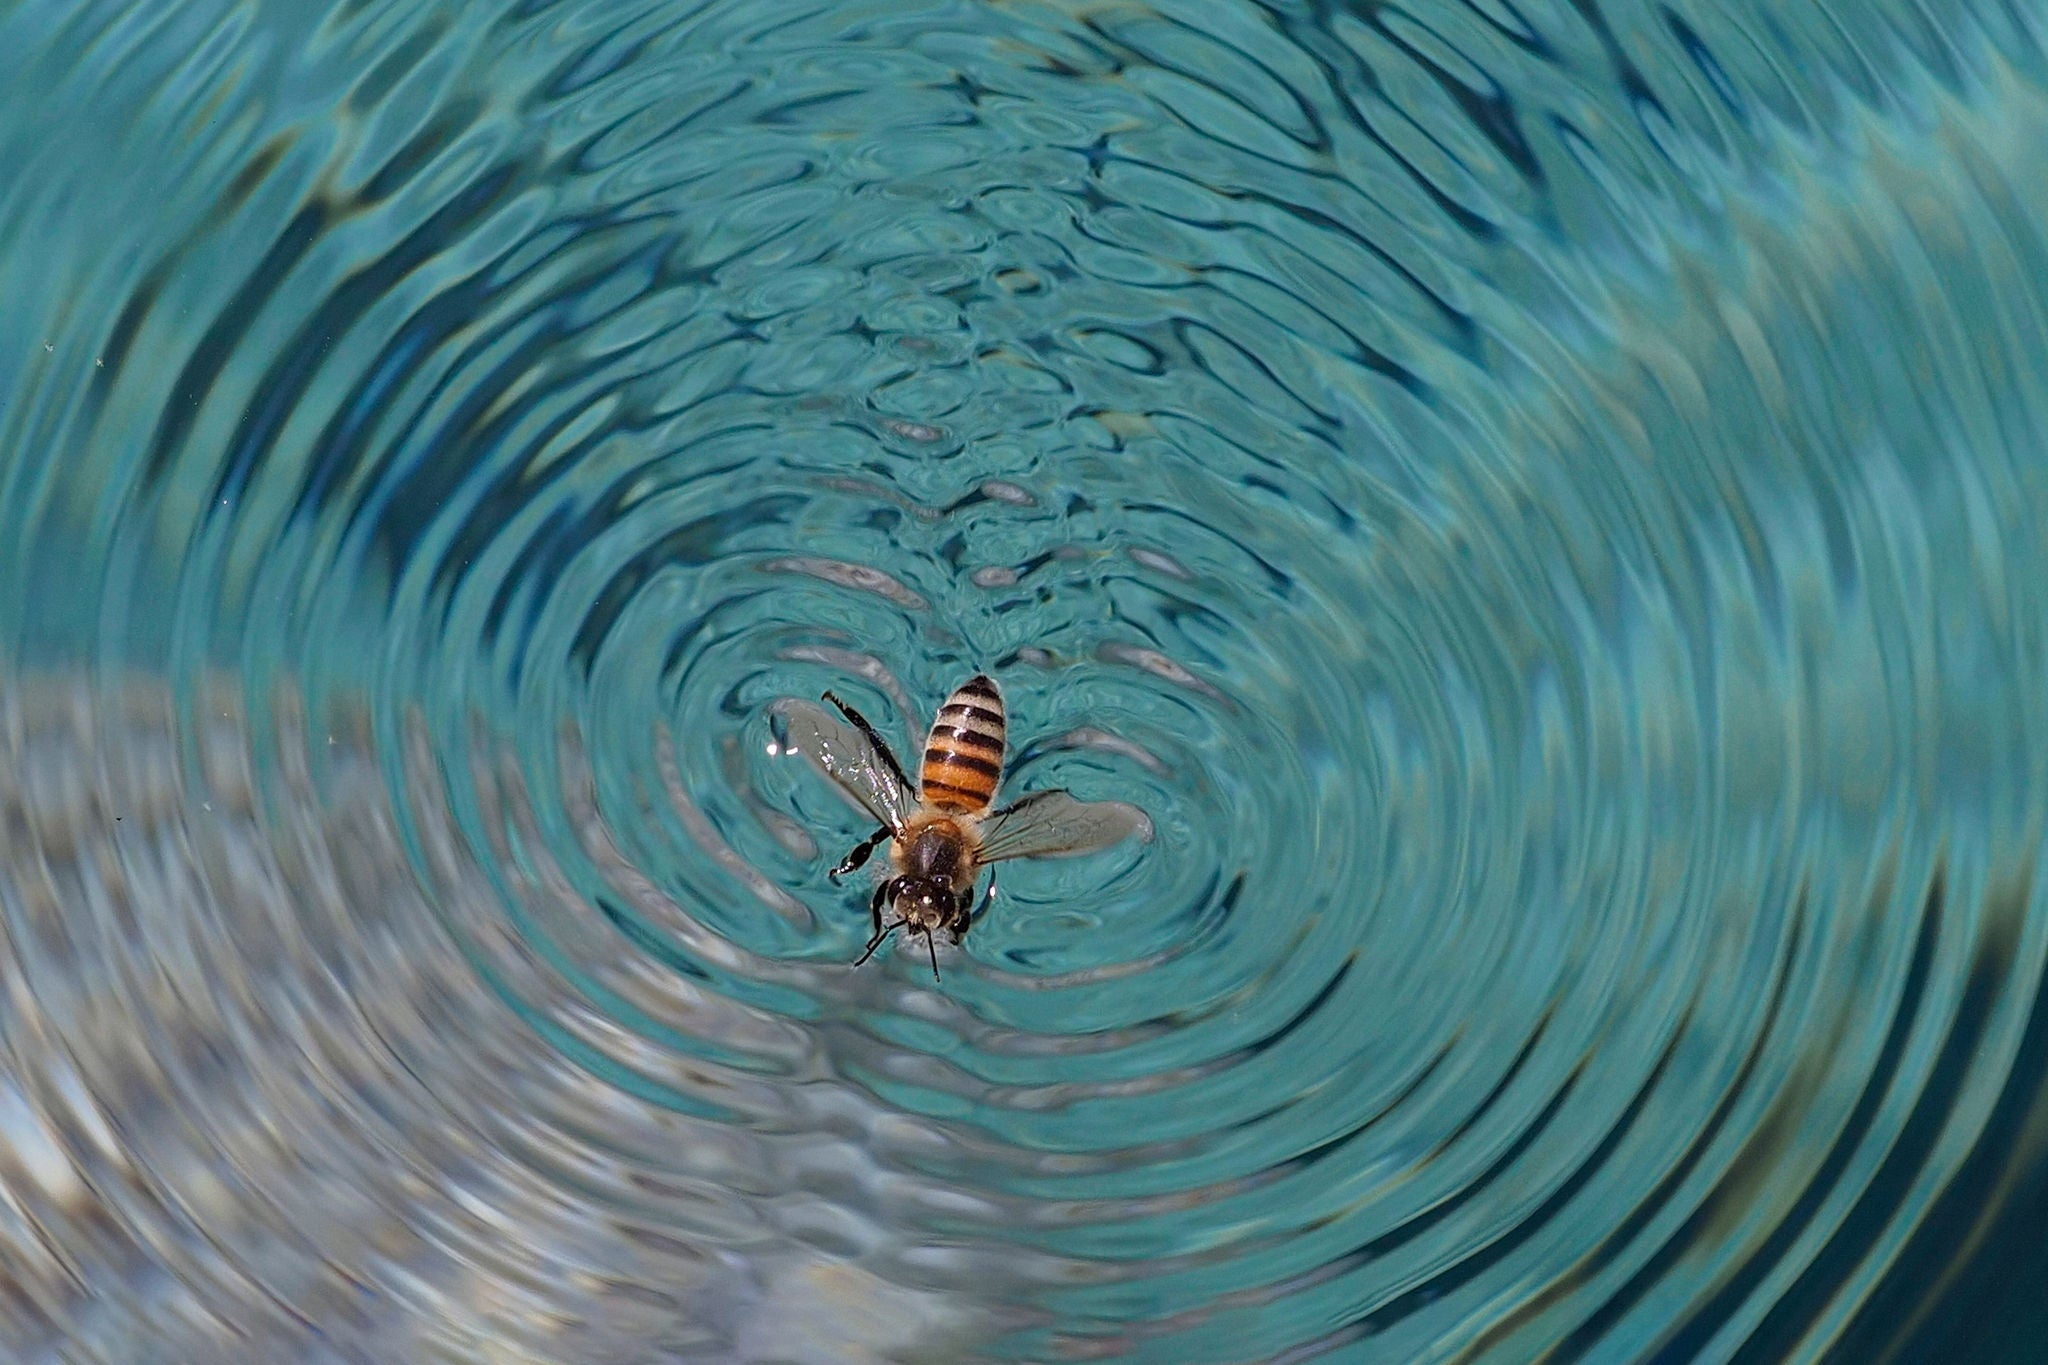 A Bee is swimming in a pool of water making small waves in The Sonoran Desert of Phoenix Arizona USA.